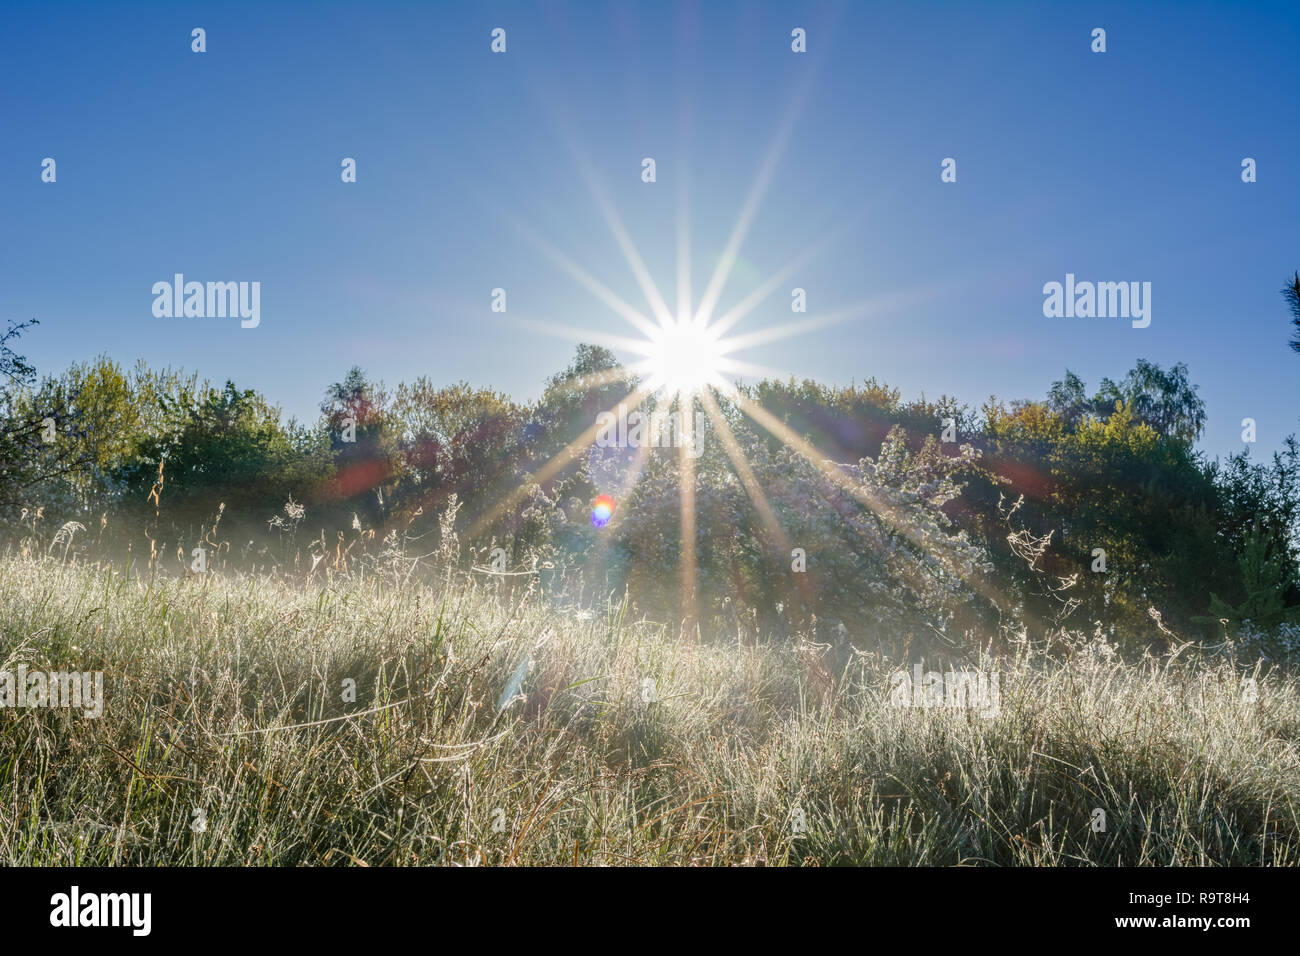 Blue sky with rays of morning sun over trees, sunlight shining in spring landscape on field of grass Stock Photo